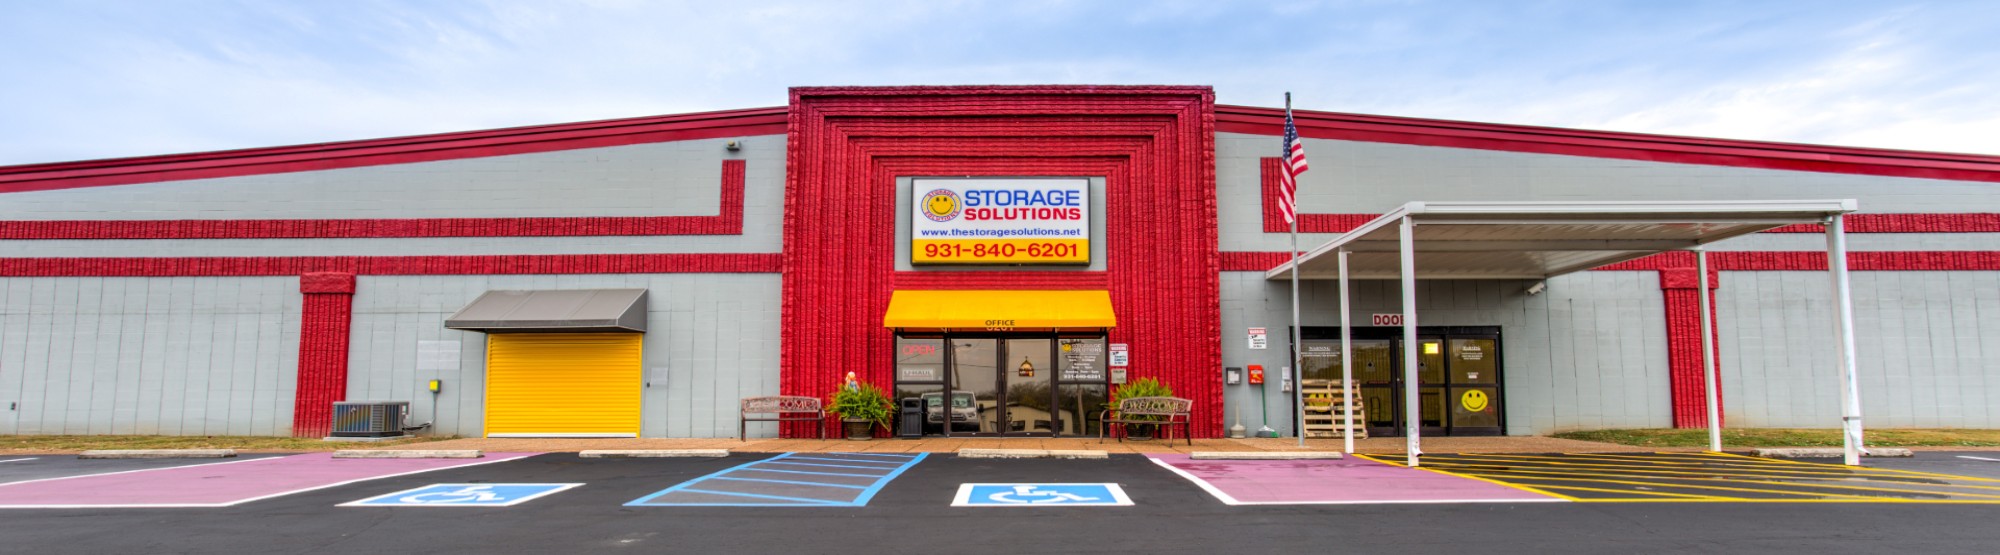 Storage Solutions in Columbia, TN